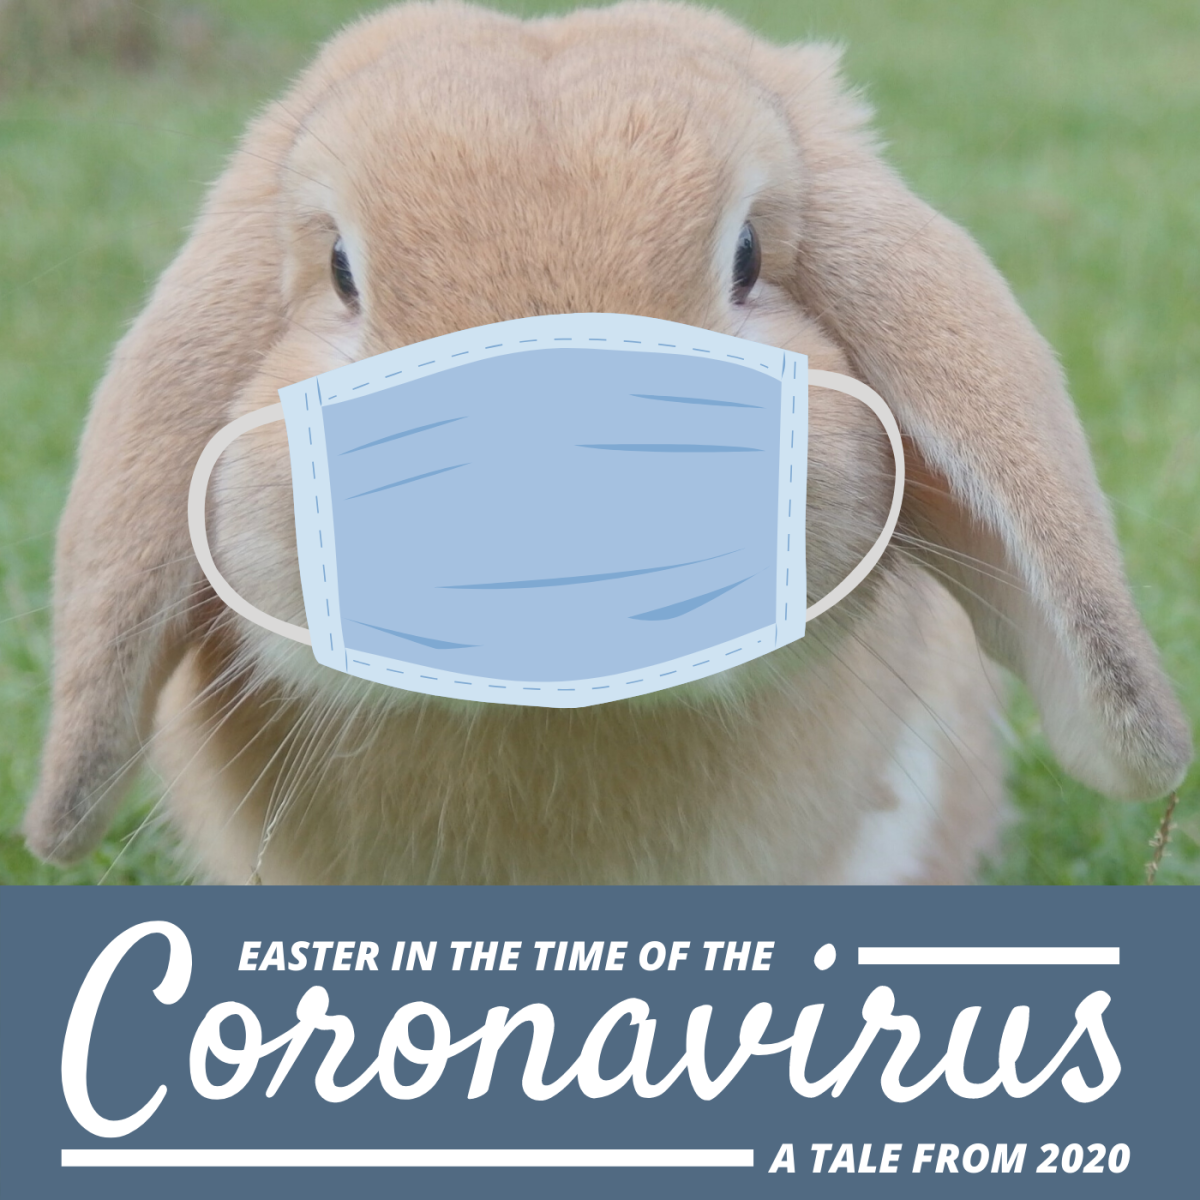 Easter During the Coronavirus: A Tale from 2020